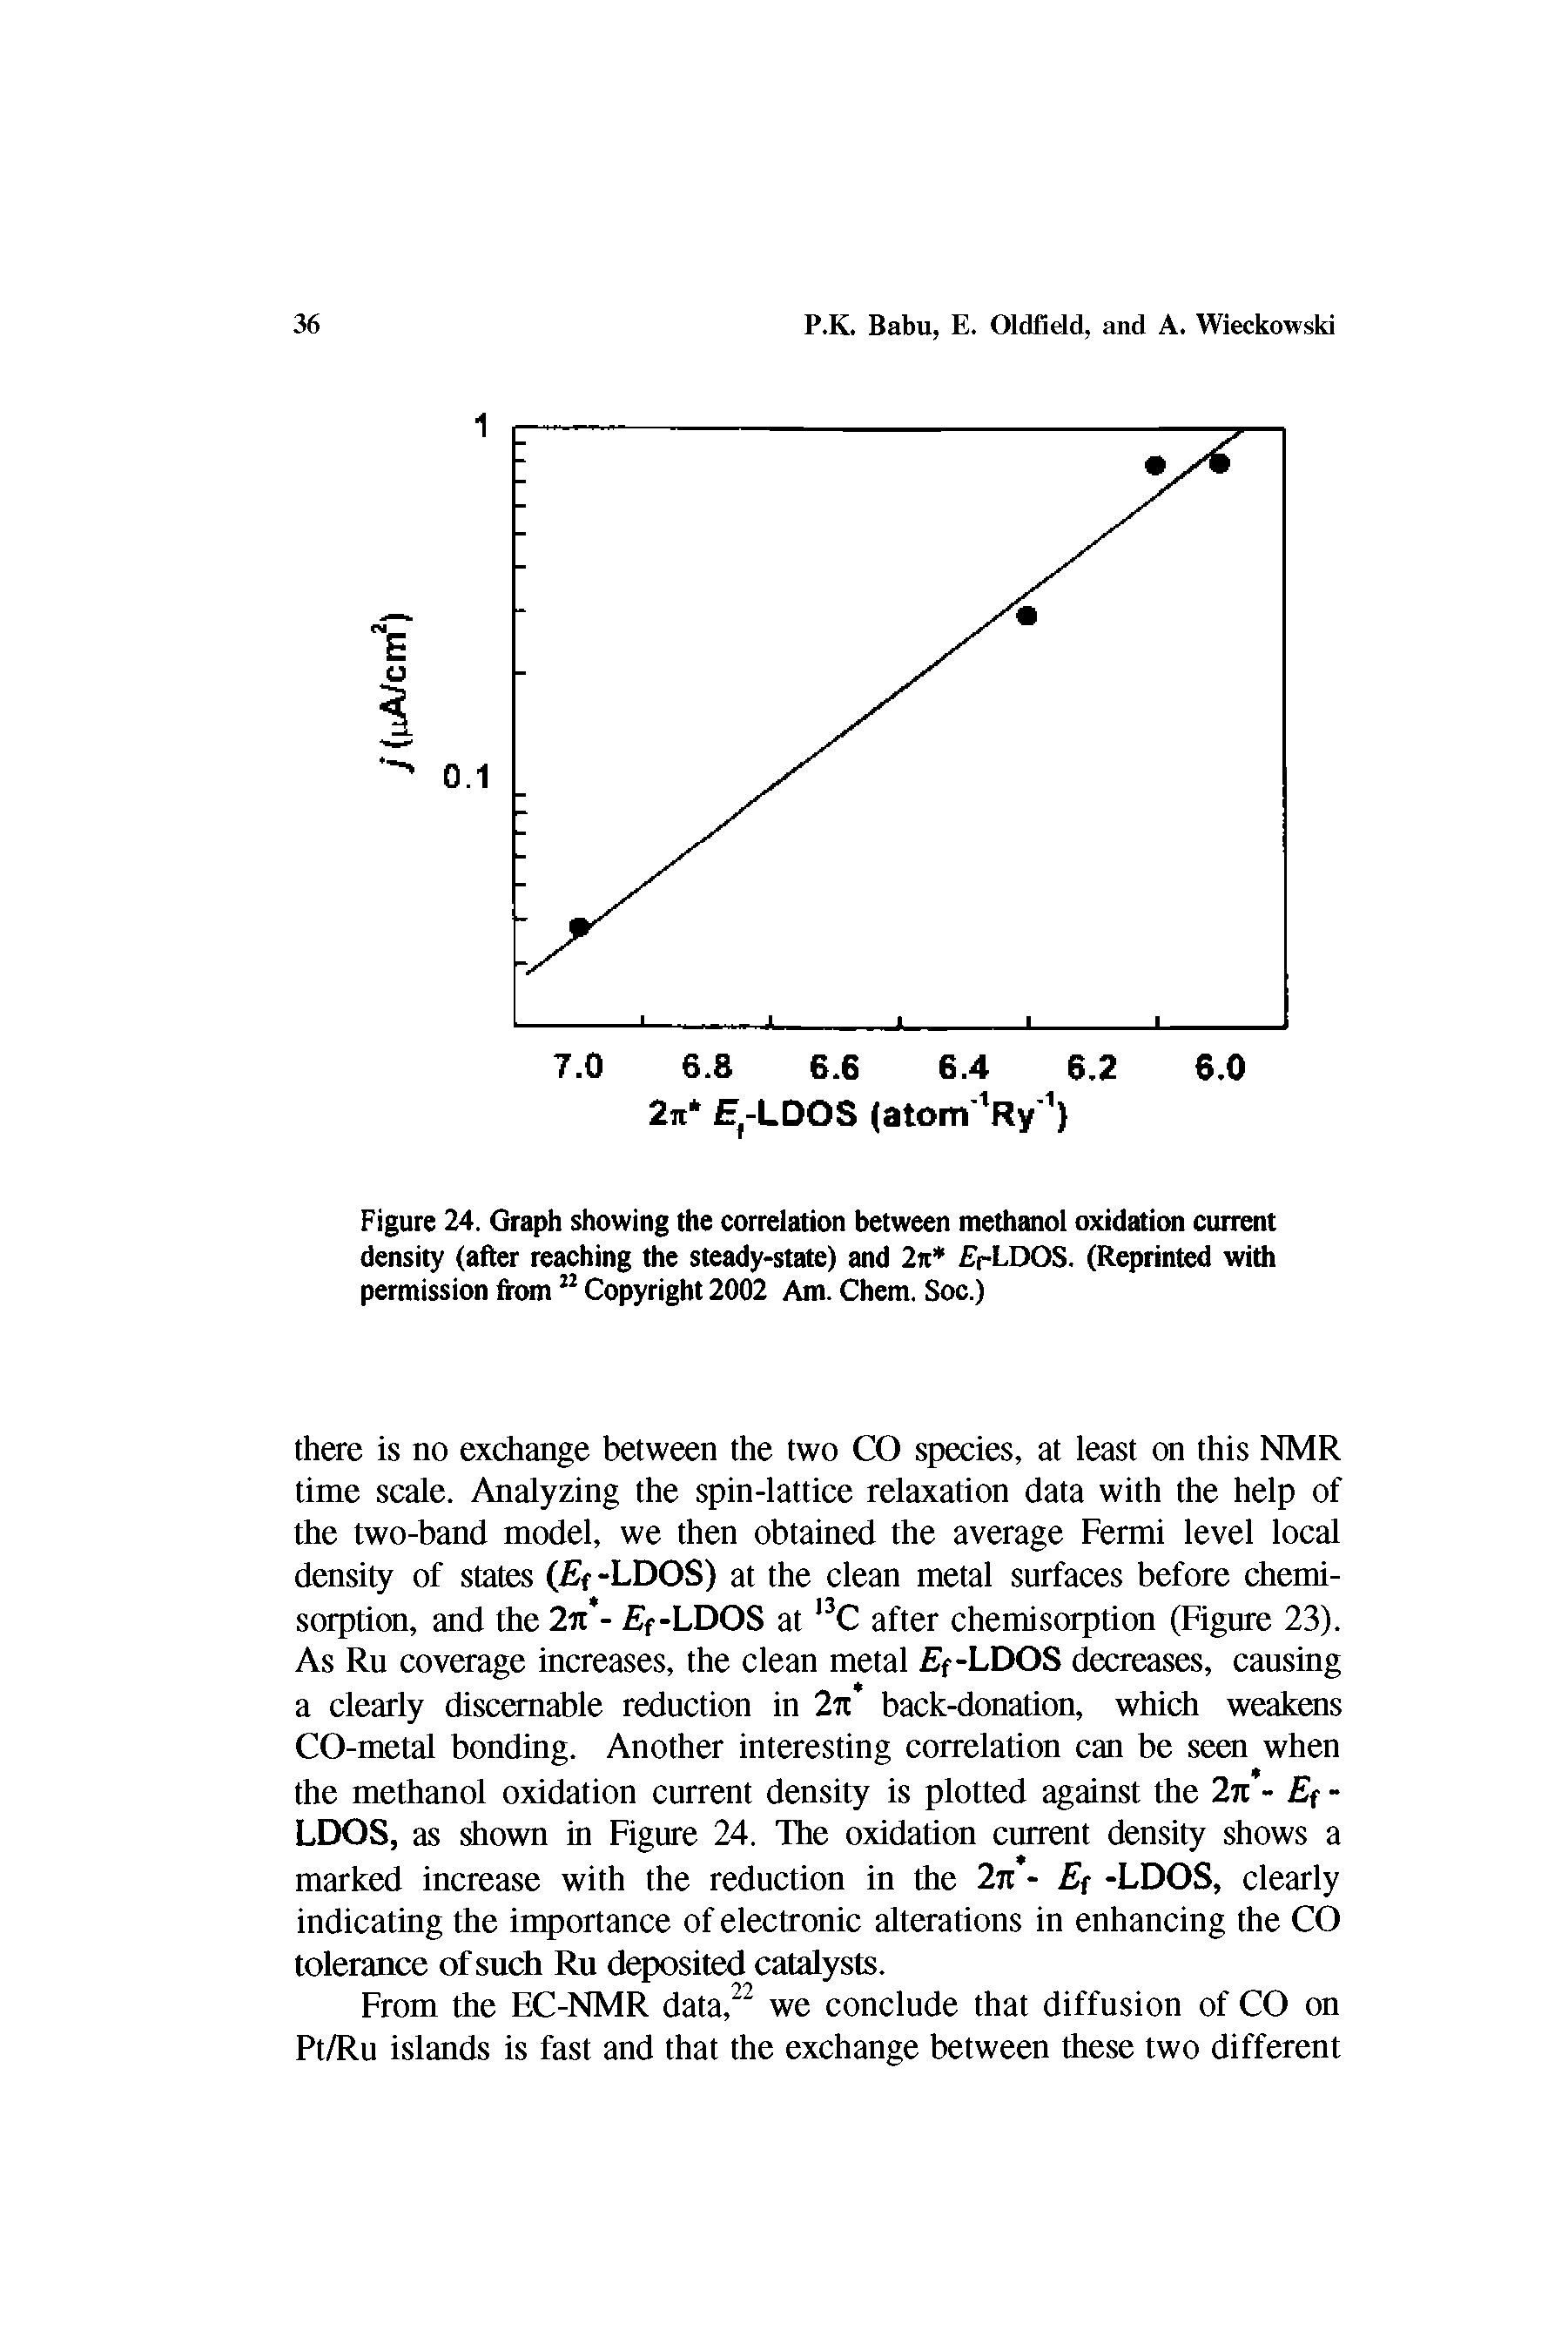 Figure 24. Graph showing the correlation between methanol oxidation current density (after reaching the steady-state) and 2it " rf DOS. (Reprinted with permission from Copyright 2002 Am. Chem. Soc.)...